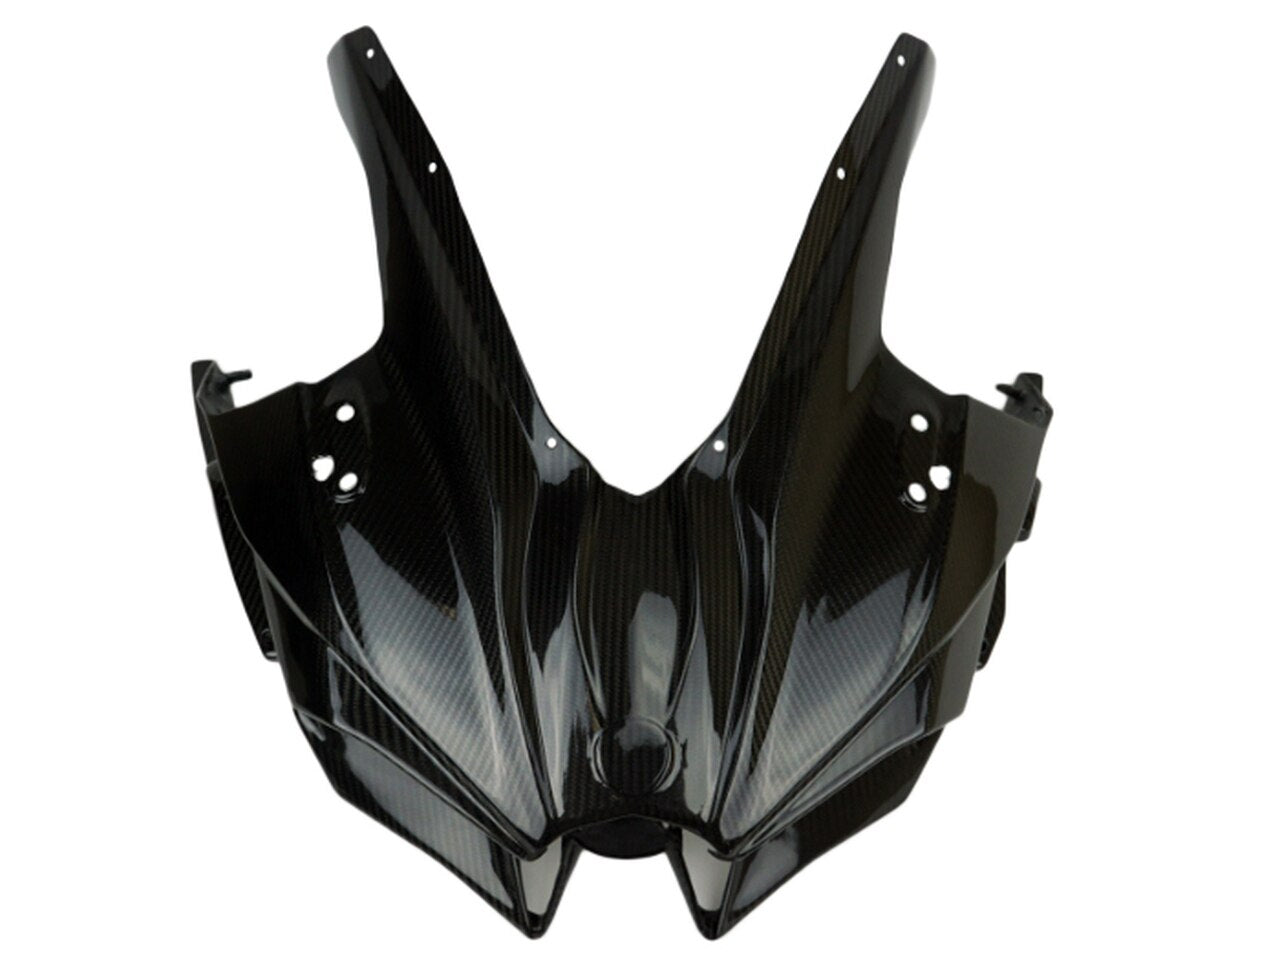 Motocomposites Front Fairing with Air Intakes in Carbon with Fiberglass for Kawasaki Ninja H2